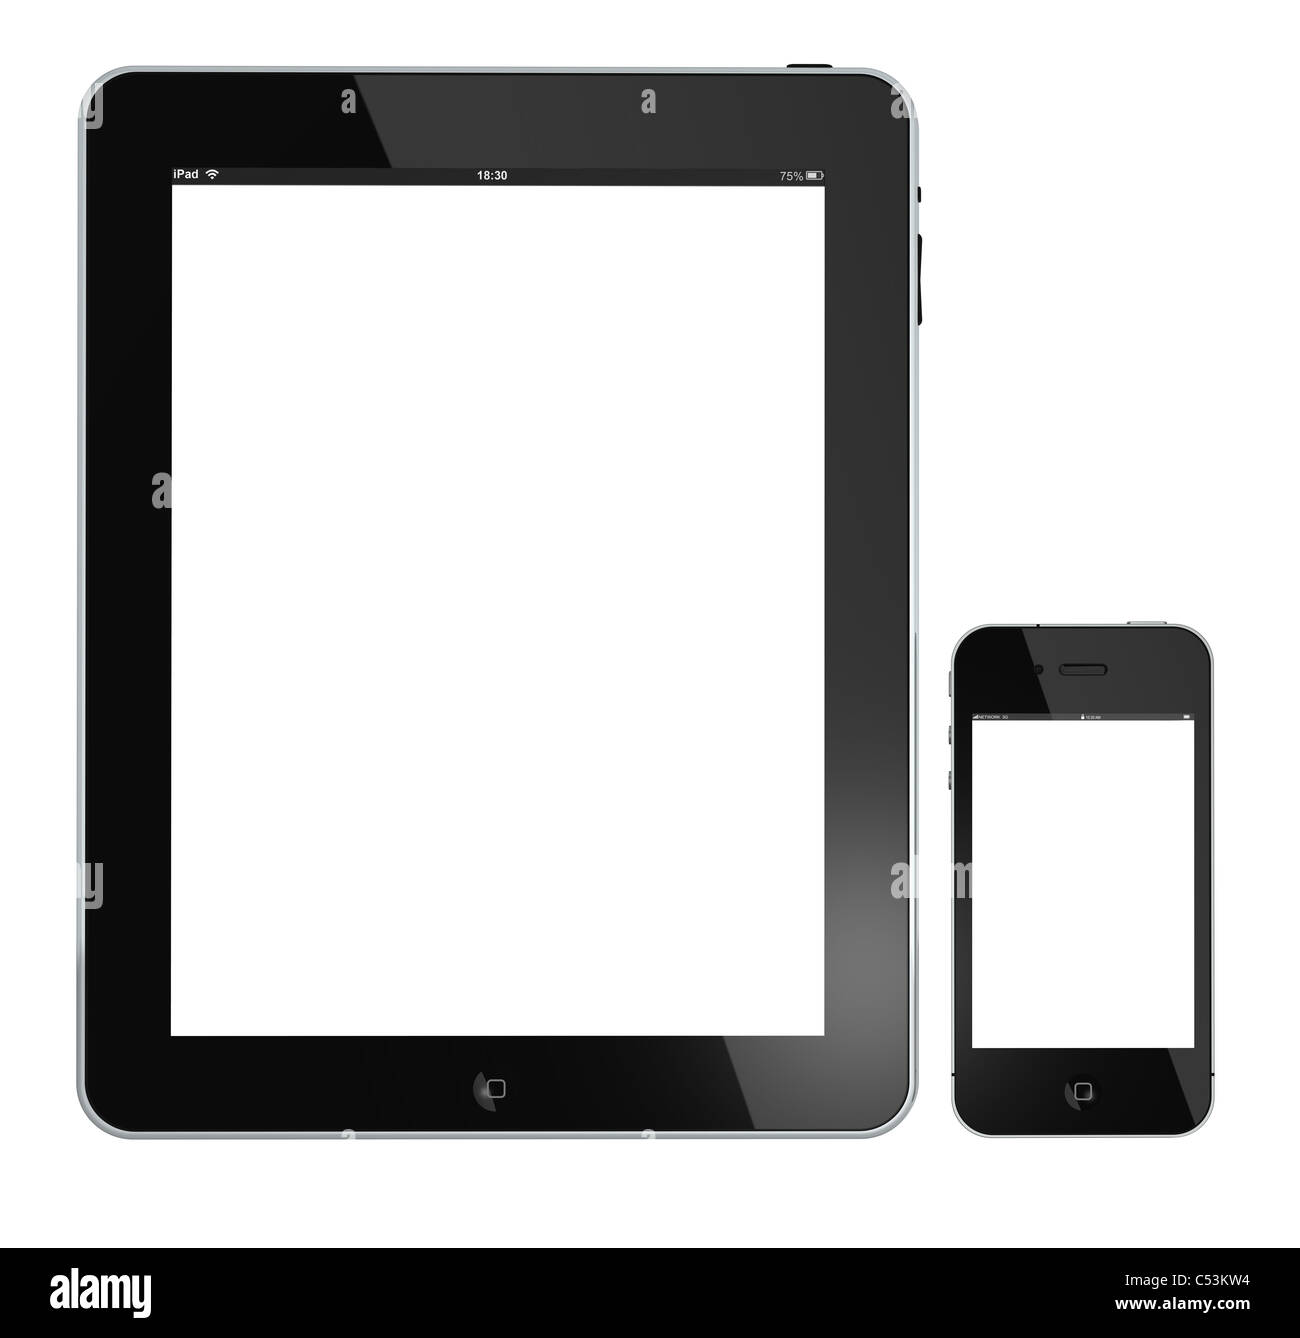 New Apple iPad portable computer tablet and iphone 4s Stock Photo